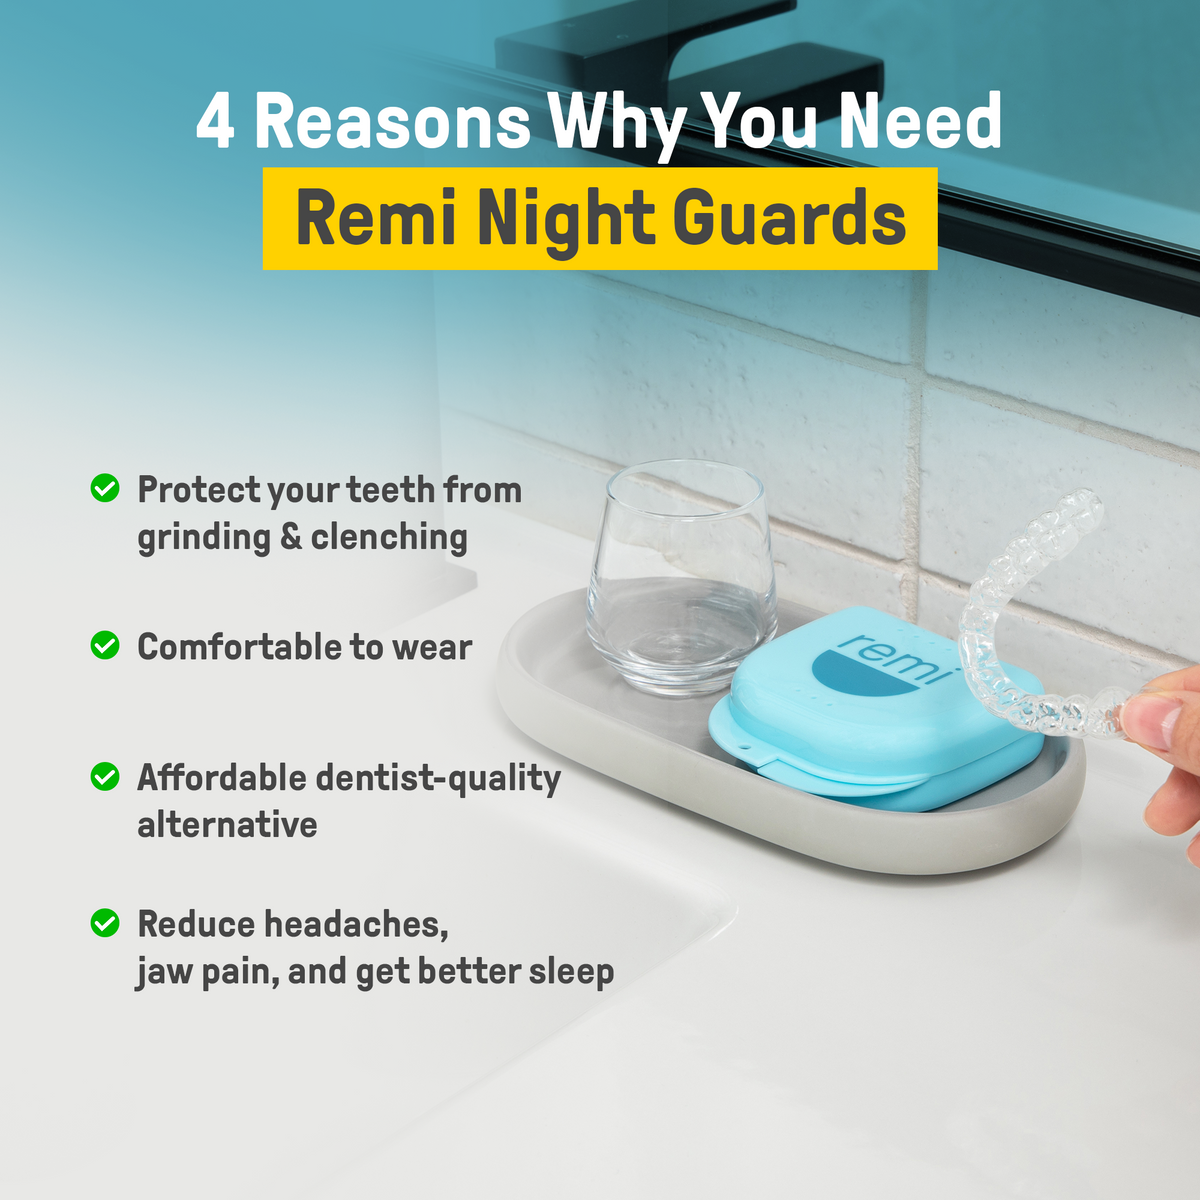 4 reasons why you need dental-grade quality Custom Night Guards to reduce jaw pain.